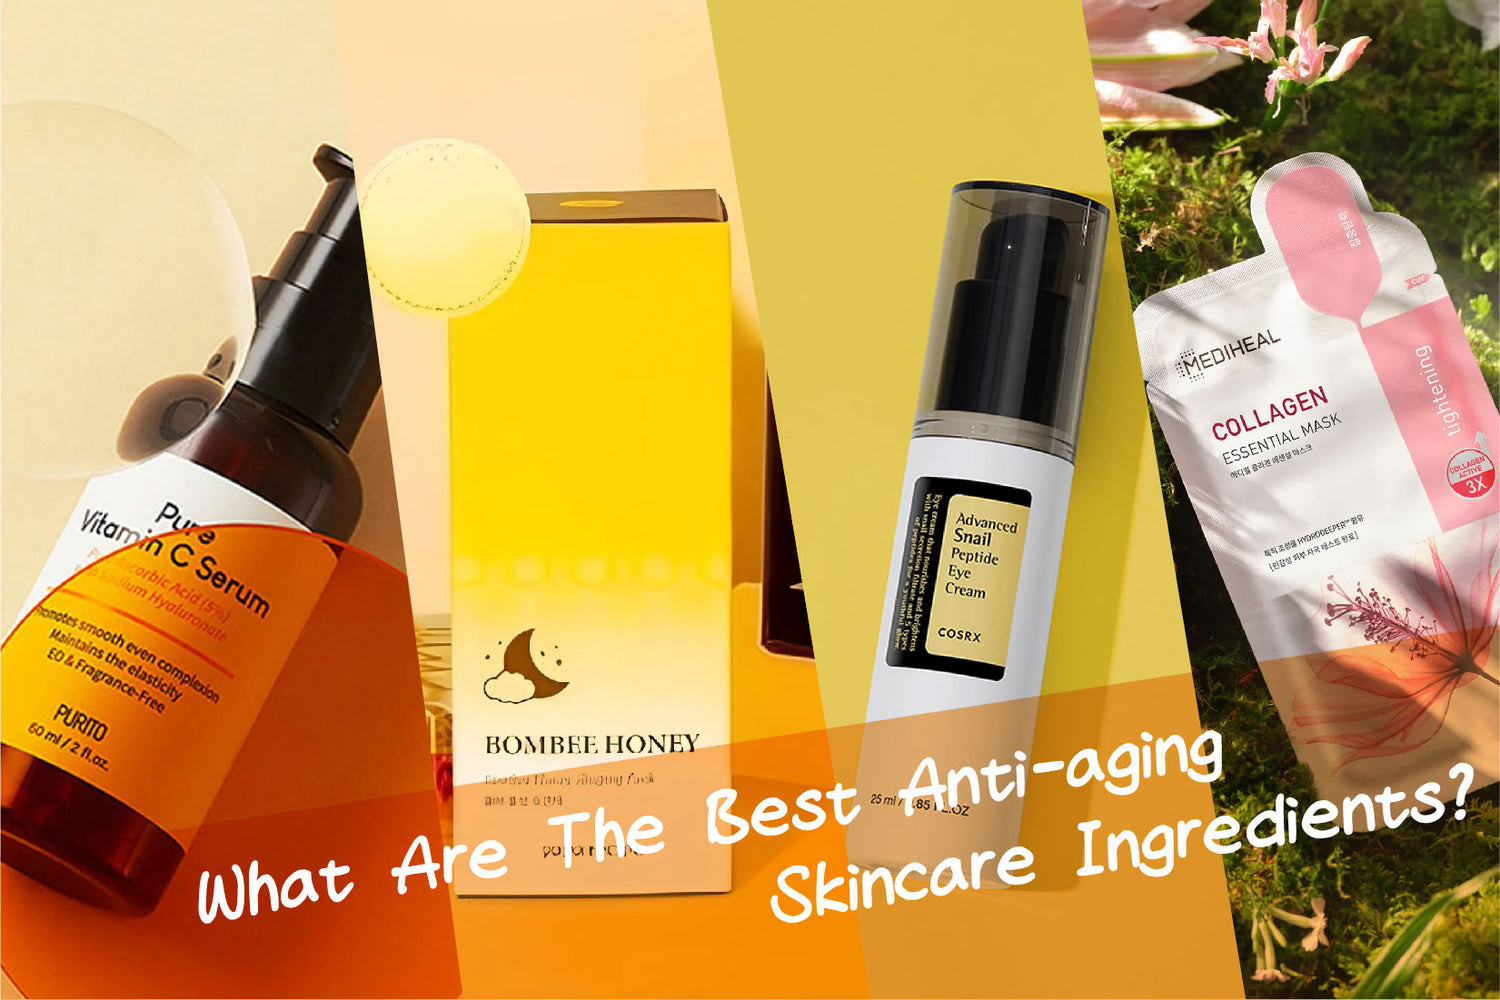 Looking for the secrets to plumper and Younger-looking skin? Skincare tips